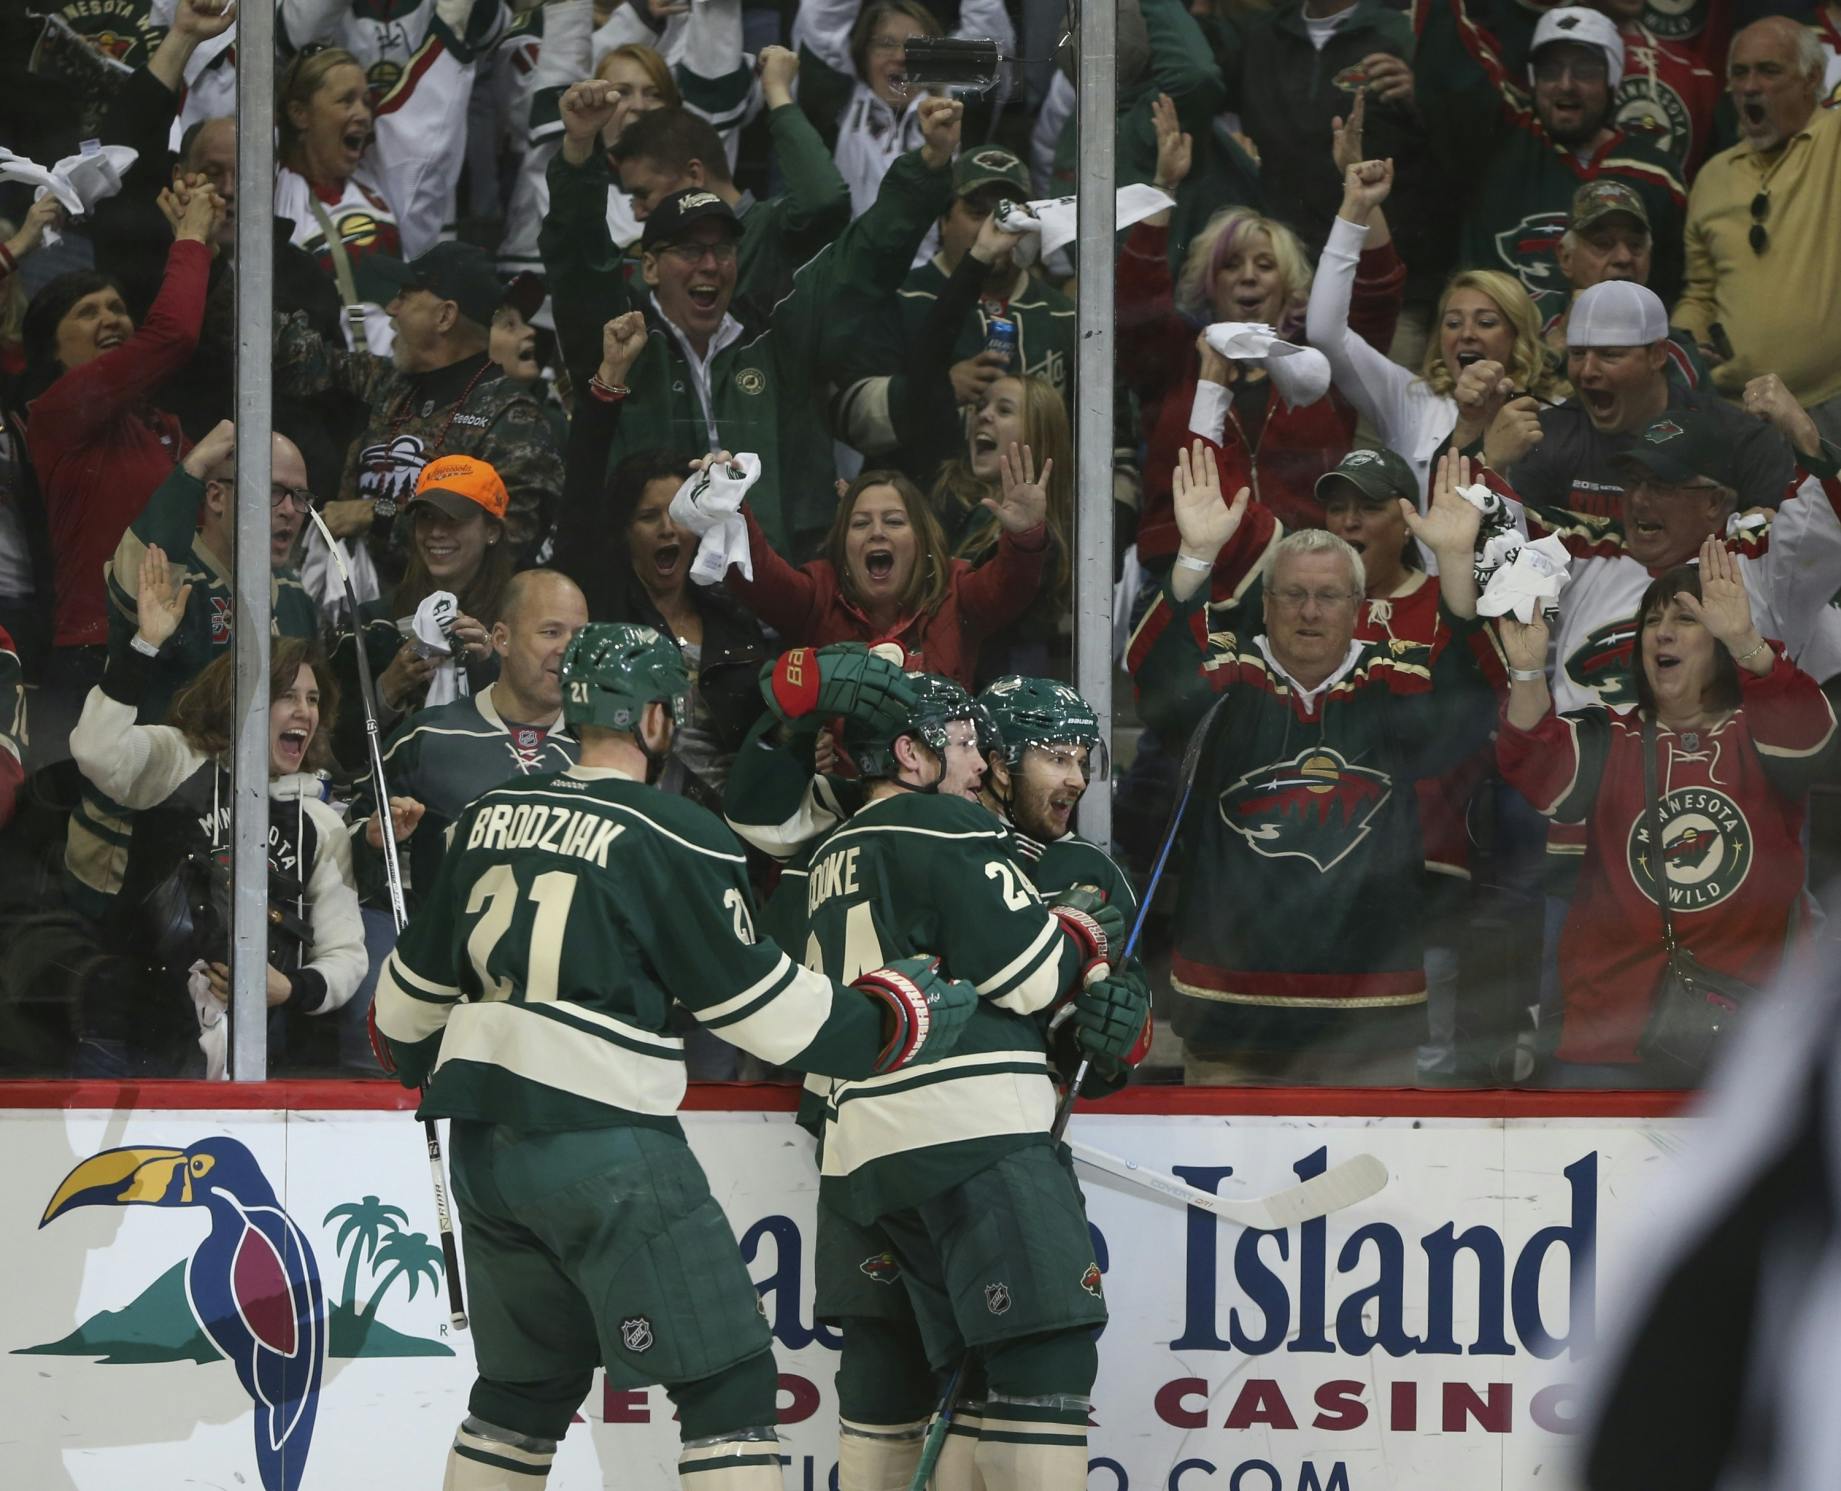 Fan videos from Xcel Energy Center and around the state after the Wild beat the Blues.